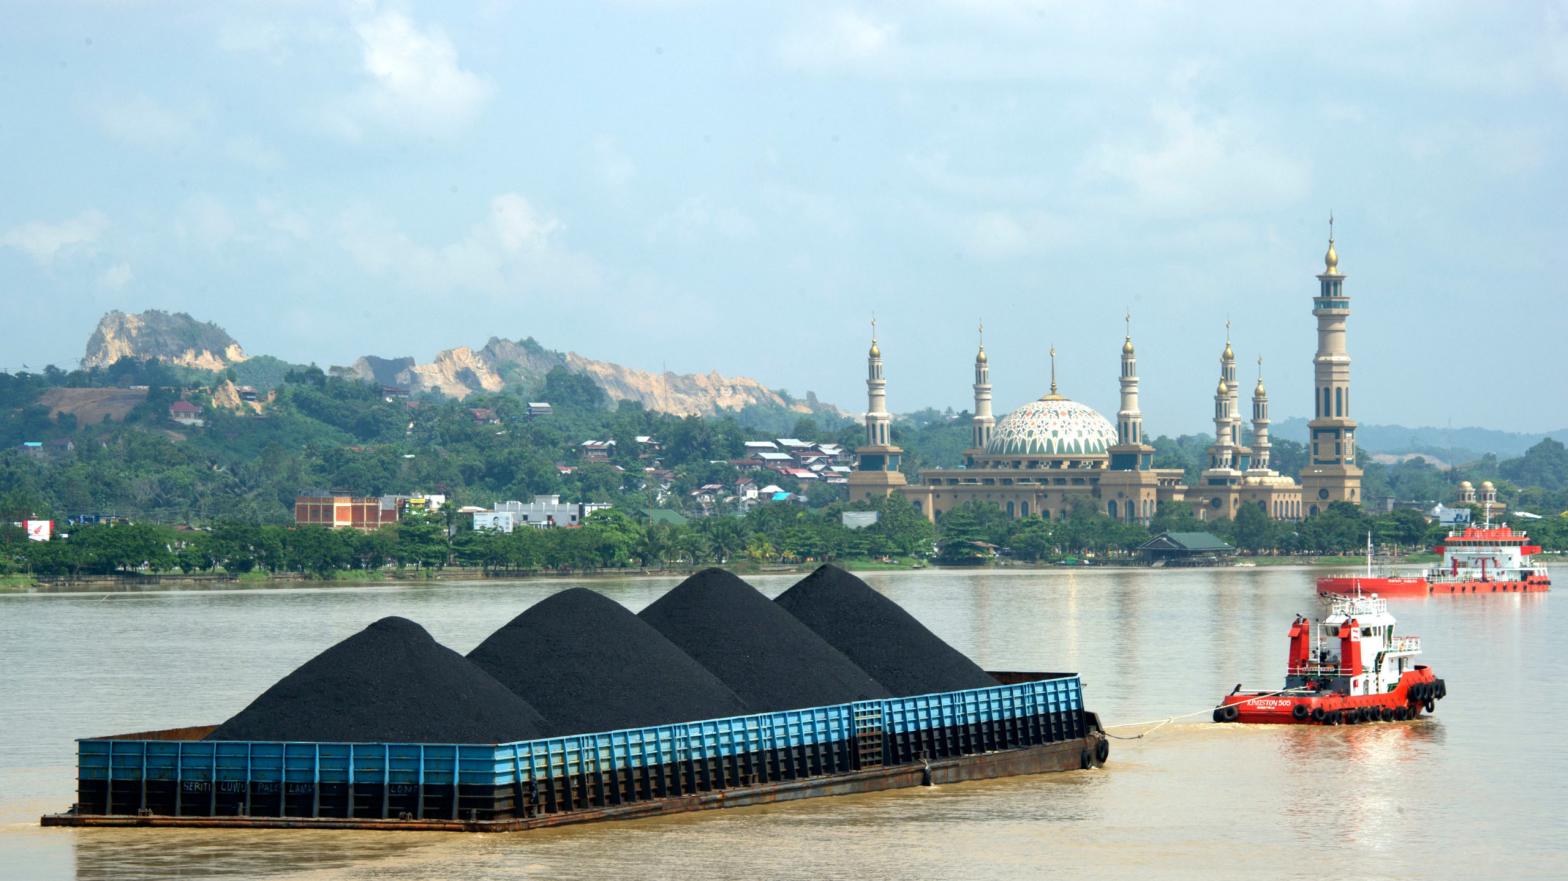 A barge on the Mahakam River with coal from the mining area in Samarinda, East Kalimantan, Indonesia. (Photo: Bay Ismoyo/AFP, Getty Images)